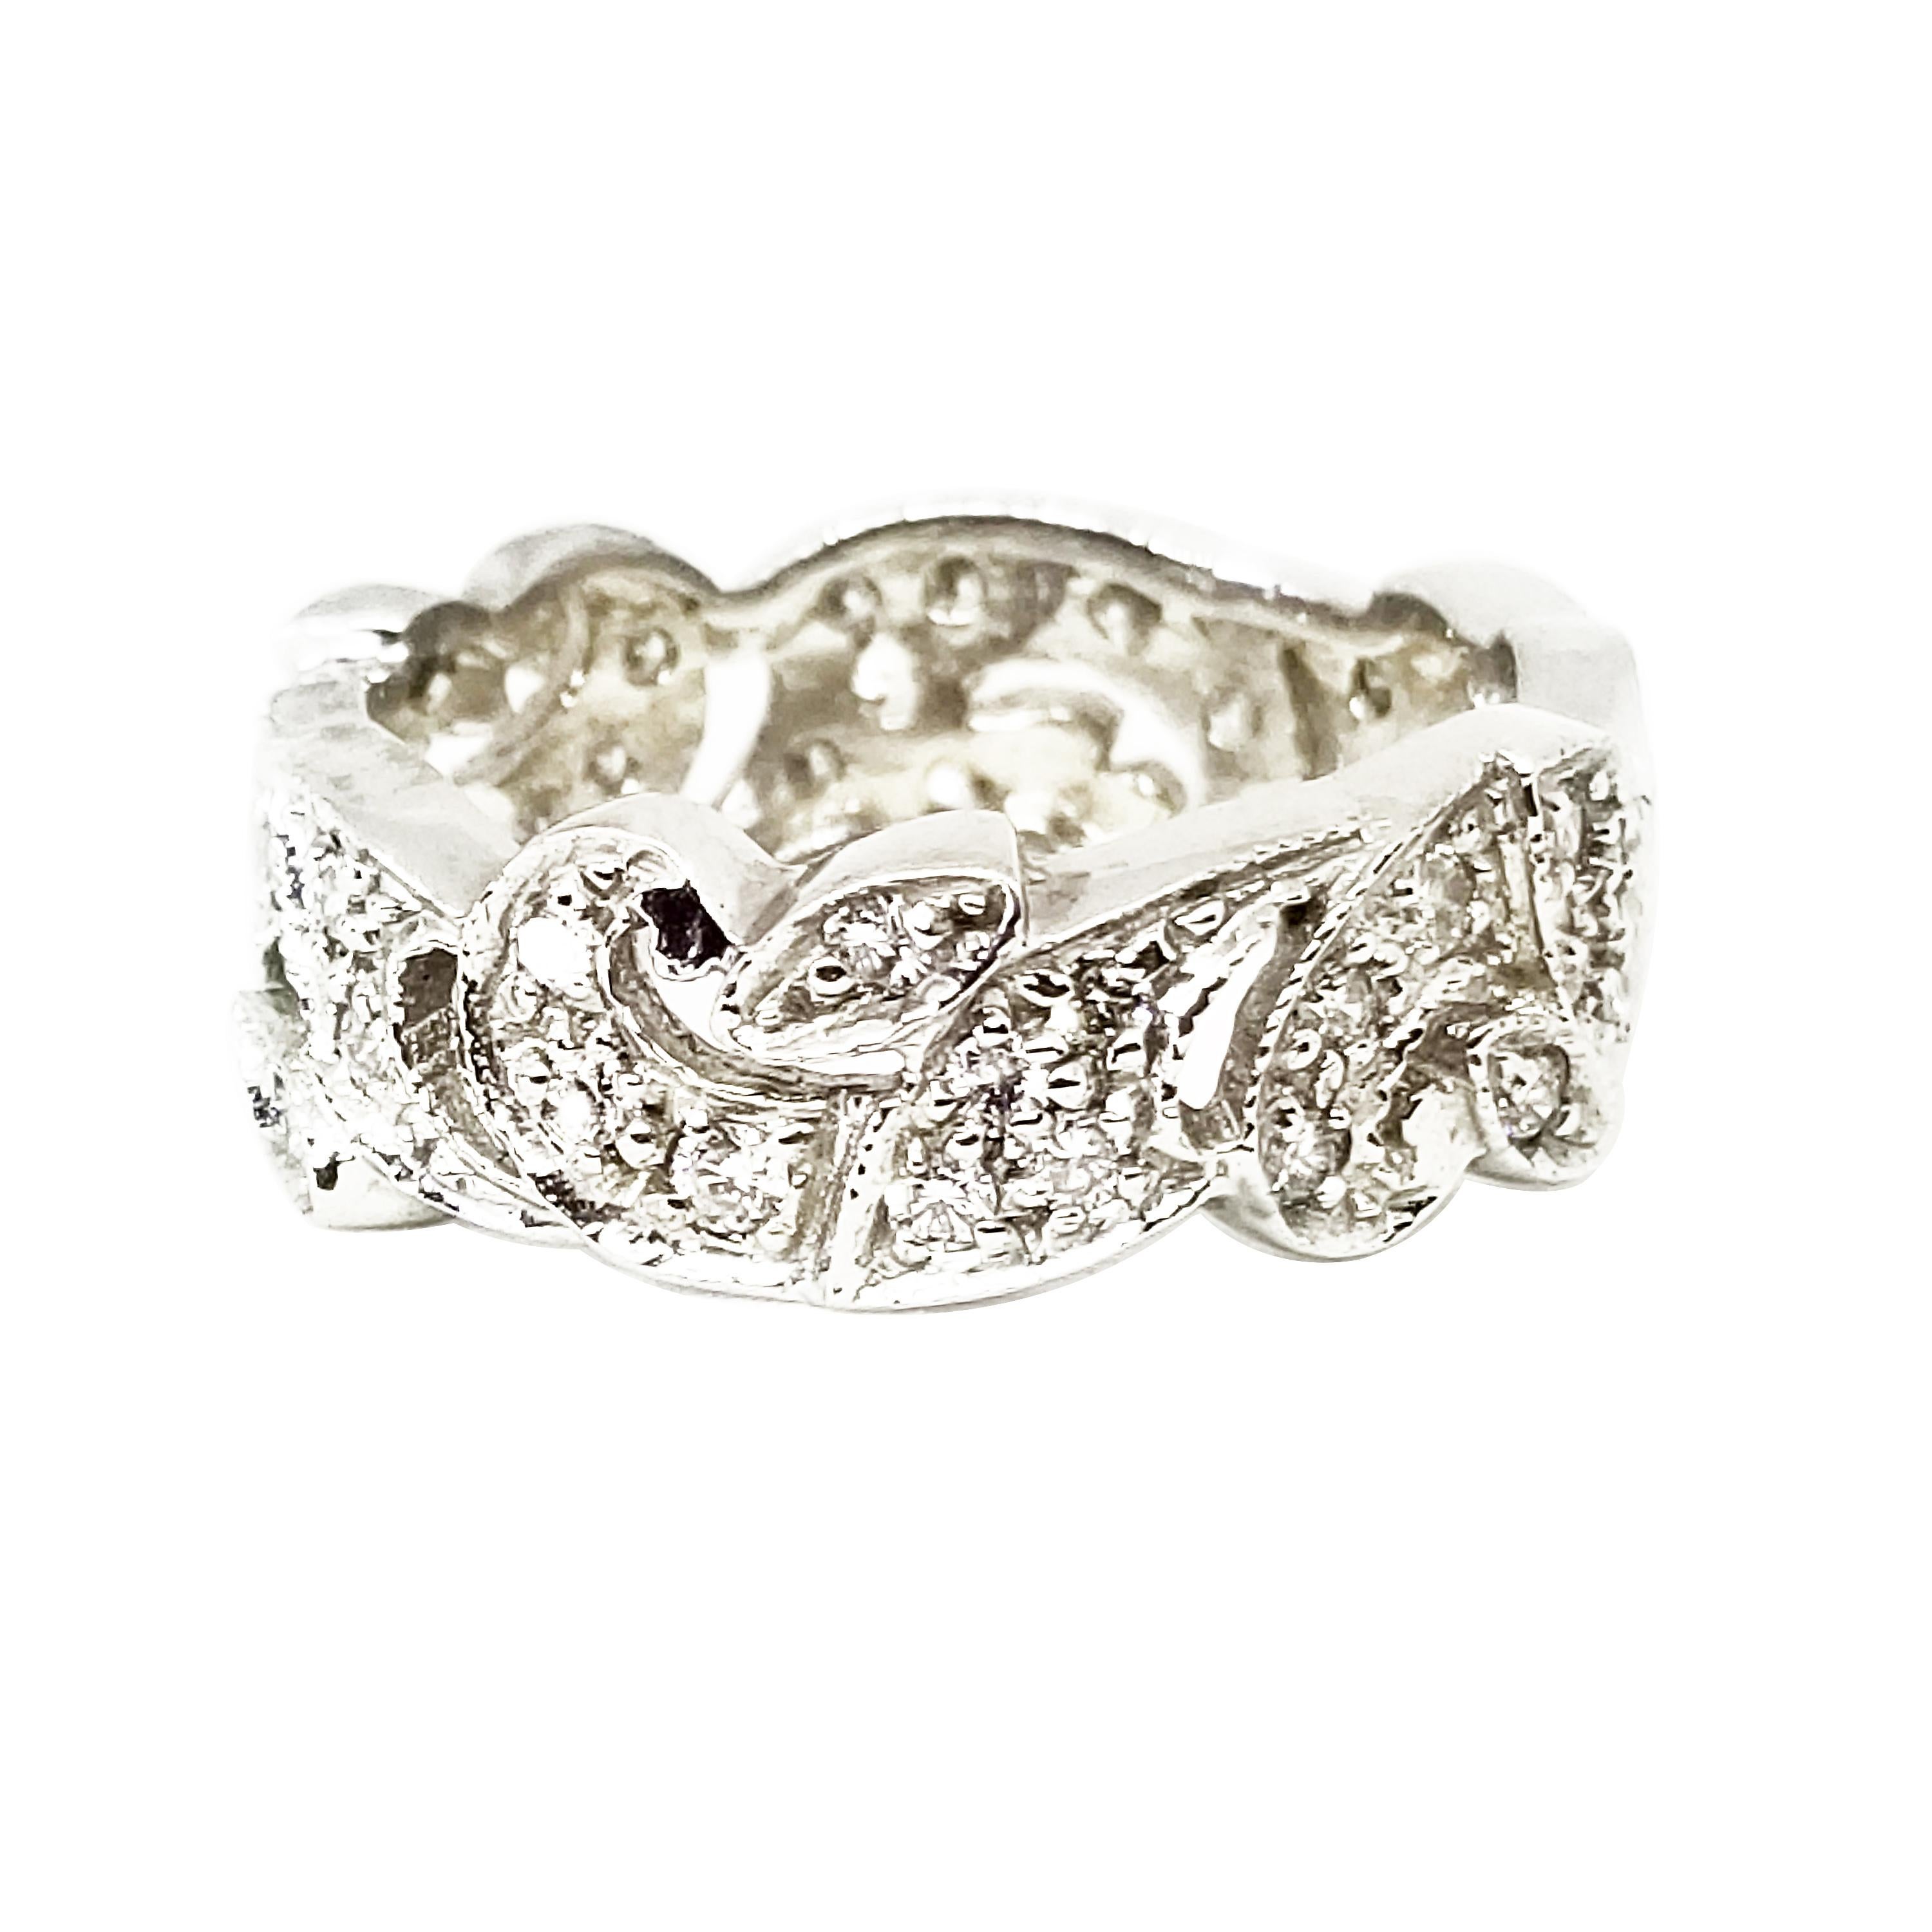 This Platinum Eternity Ring features Round Brilliant Diamonds of 0.70 Carat total weight, G-H Color and Si1 Clarity, and are bead set entirely around the ring. The Intricate Band features an open work swirl design. A Unique Wedding, Anniversary or